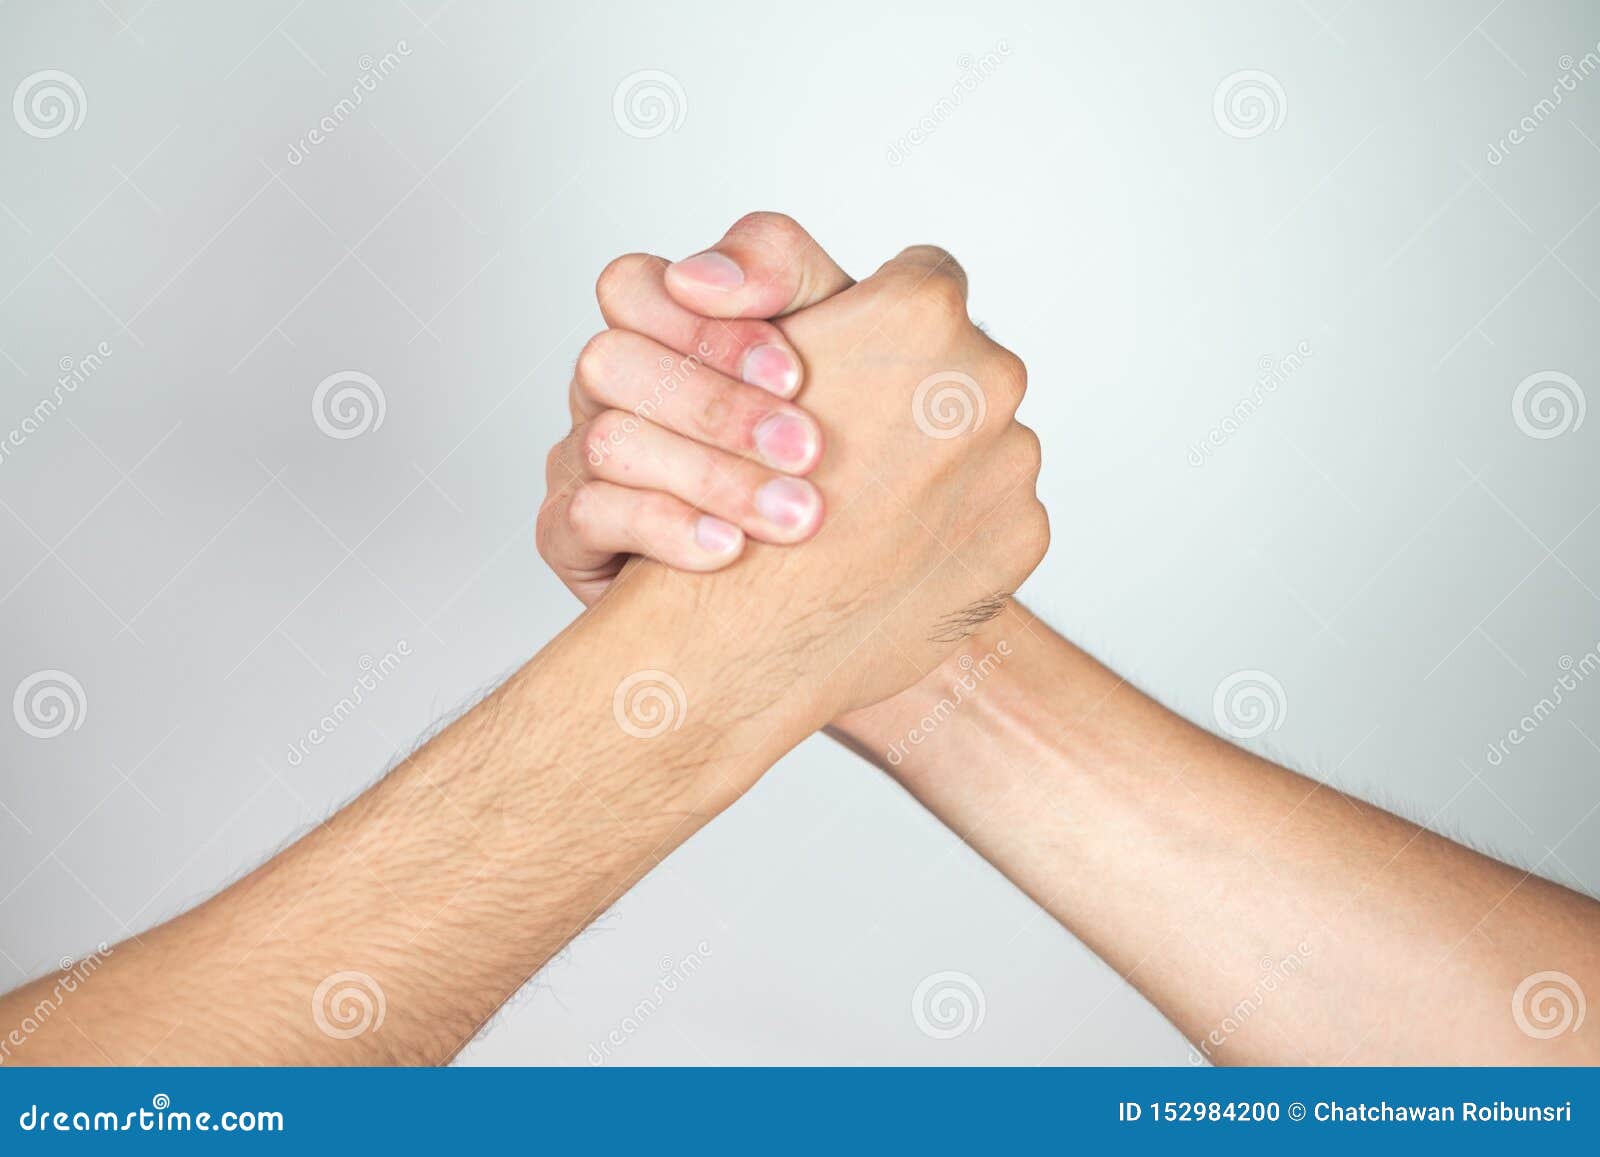 Holding Hands of Two Men on a White Background,Friends,Dear Friend ...